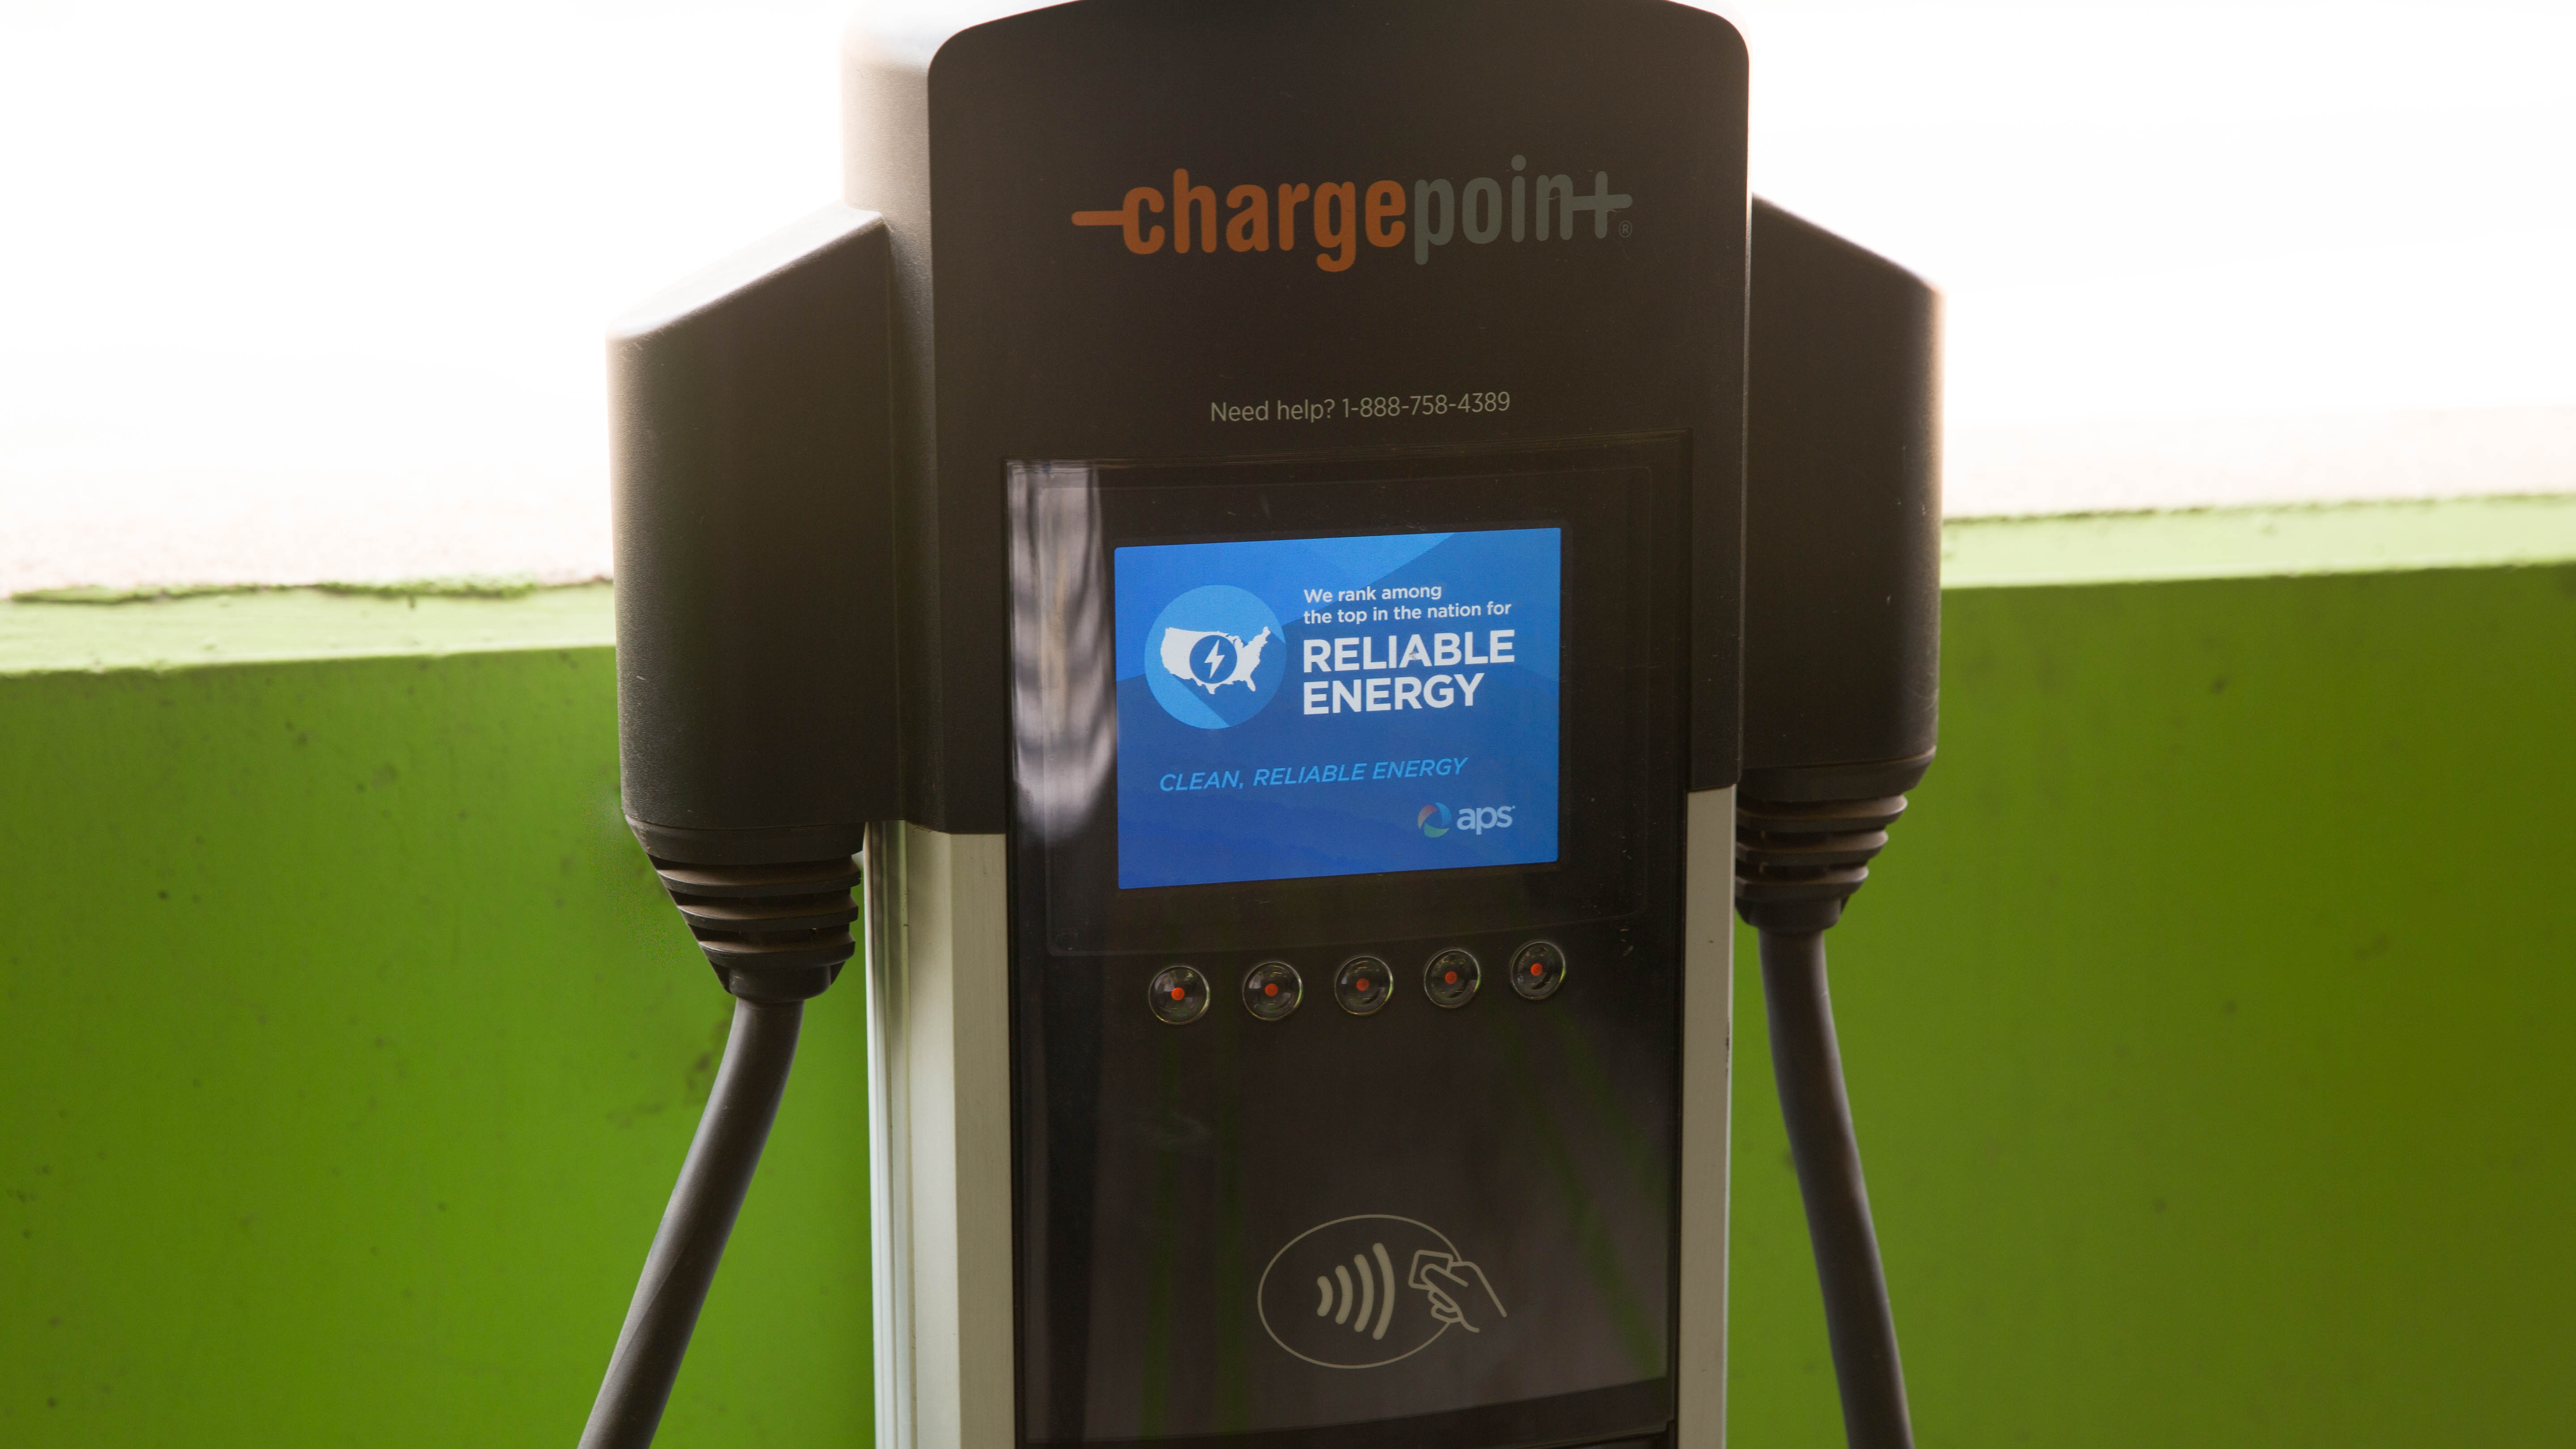 close-up view of an electric vehicle charger